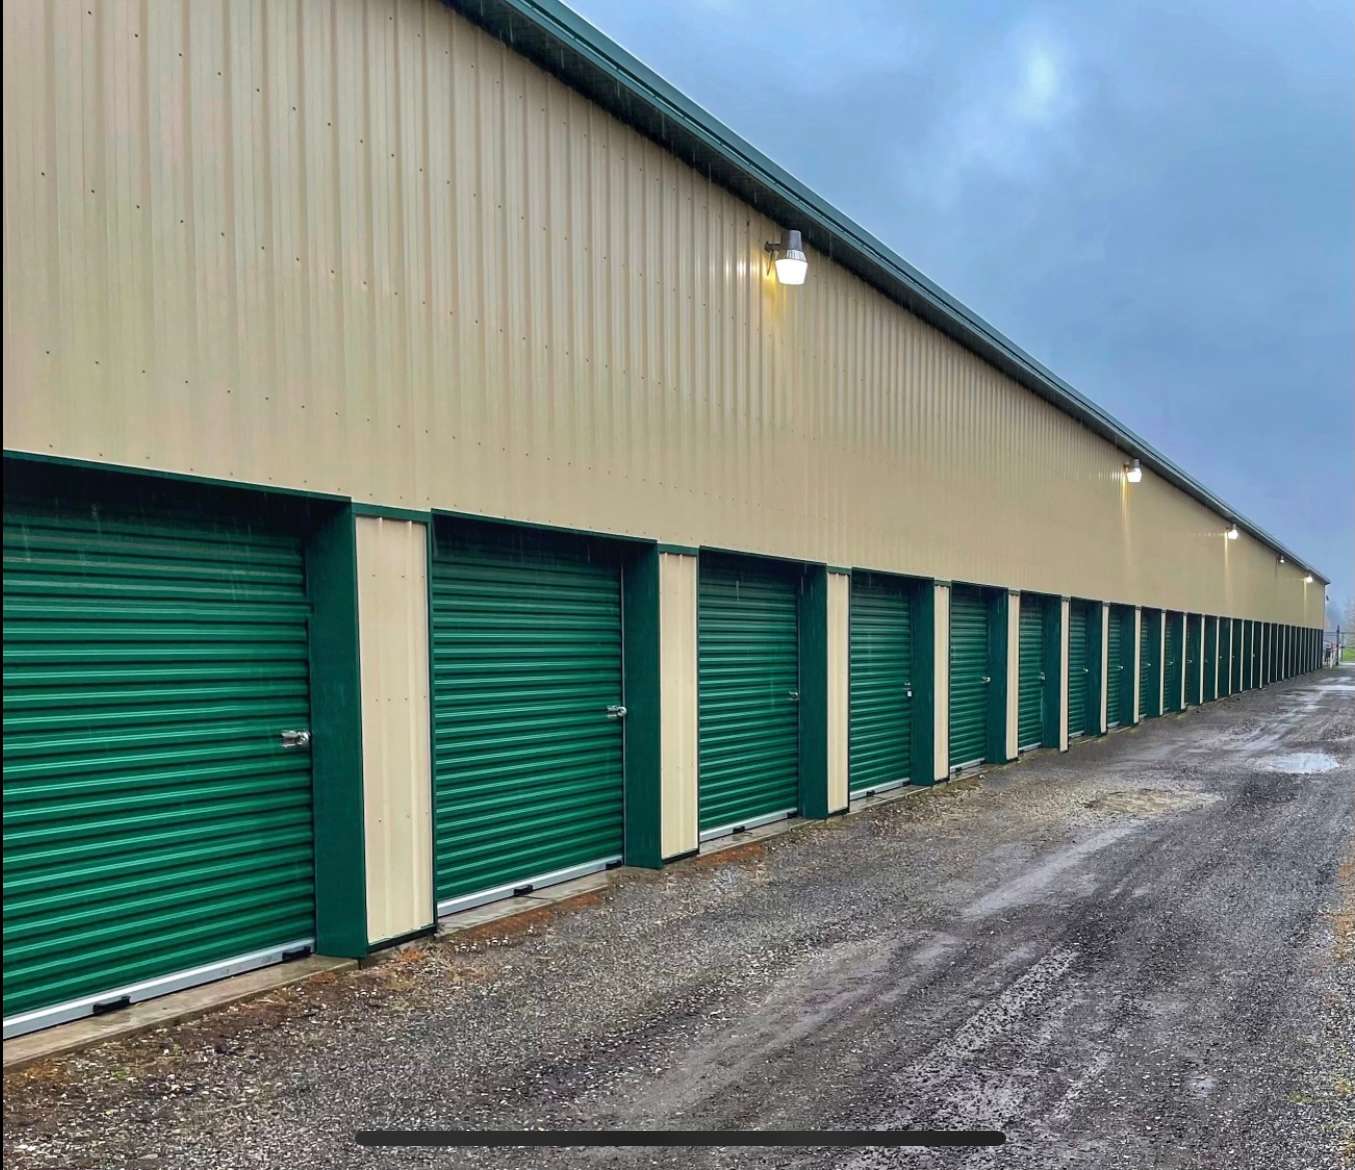 Self storage unit aisle with green doors